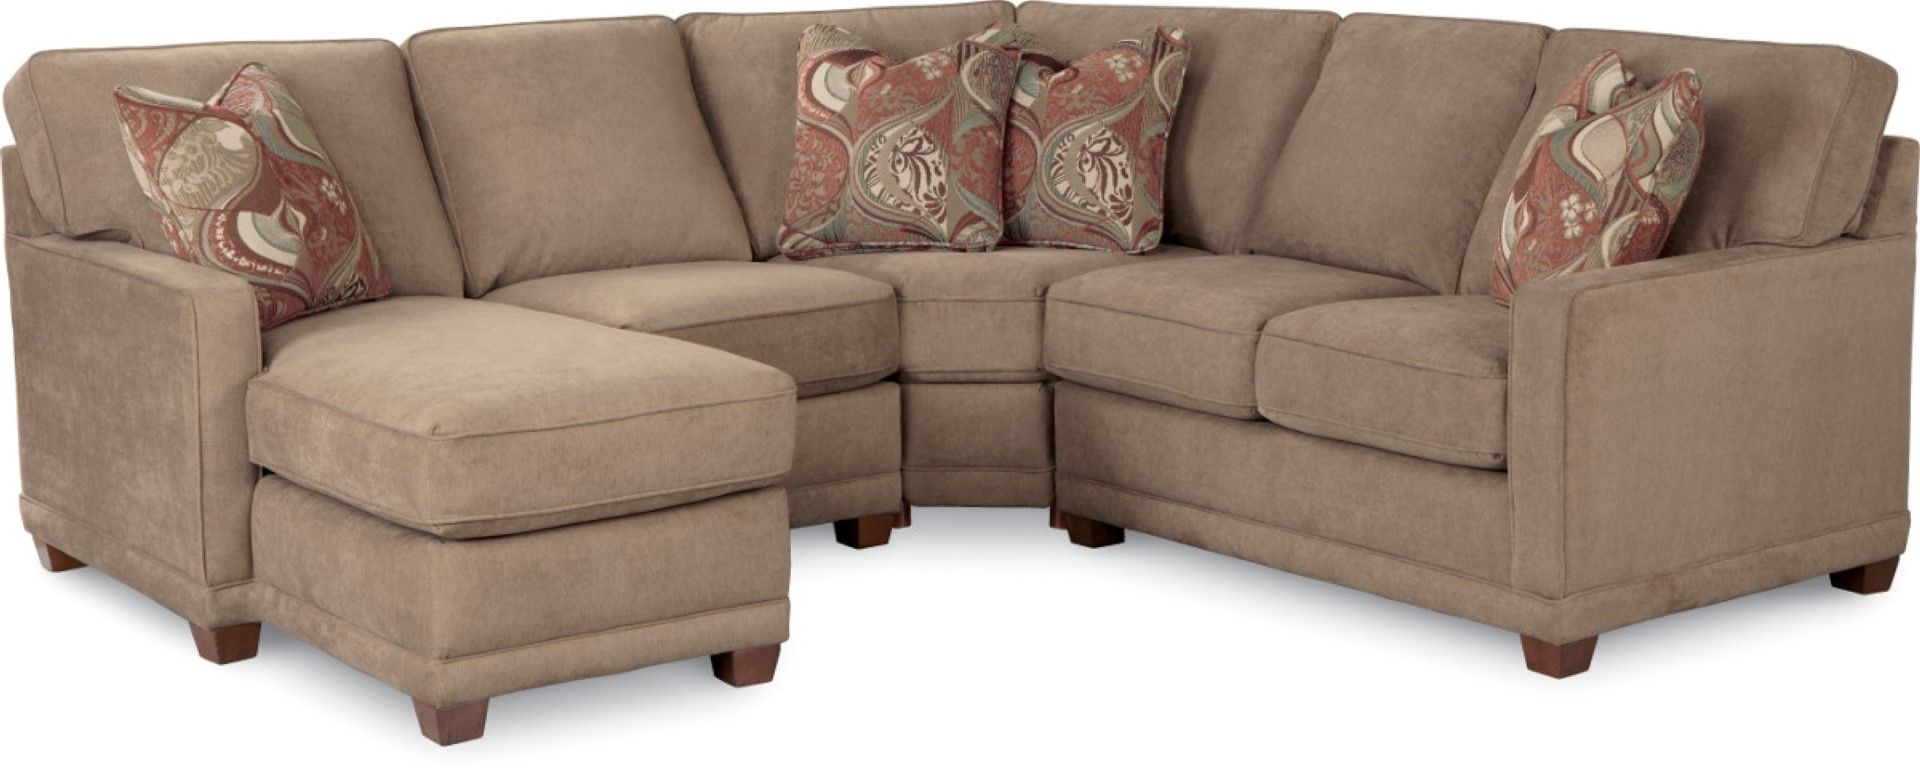 Featured Photo of Lazyboy Sectional Sofas